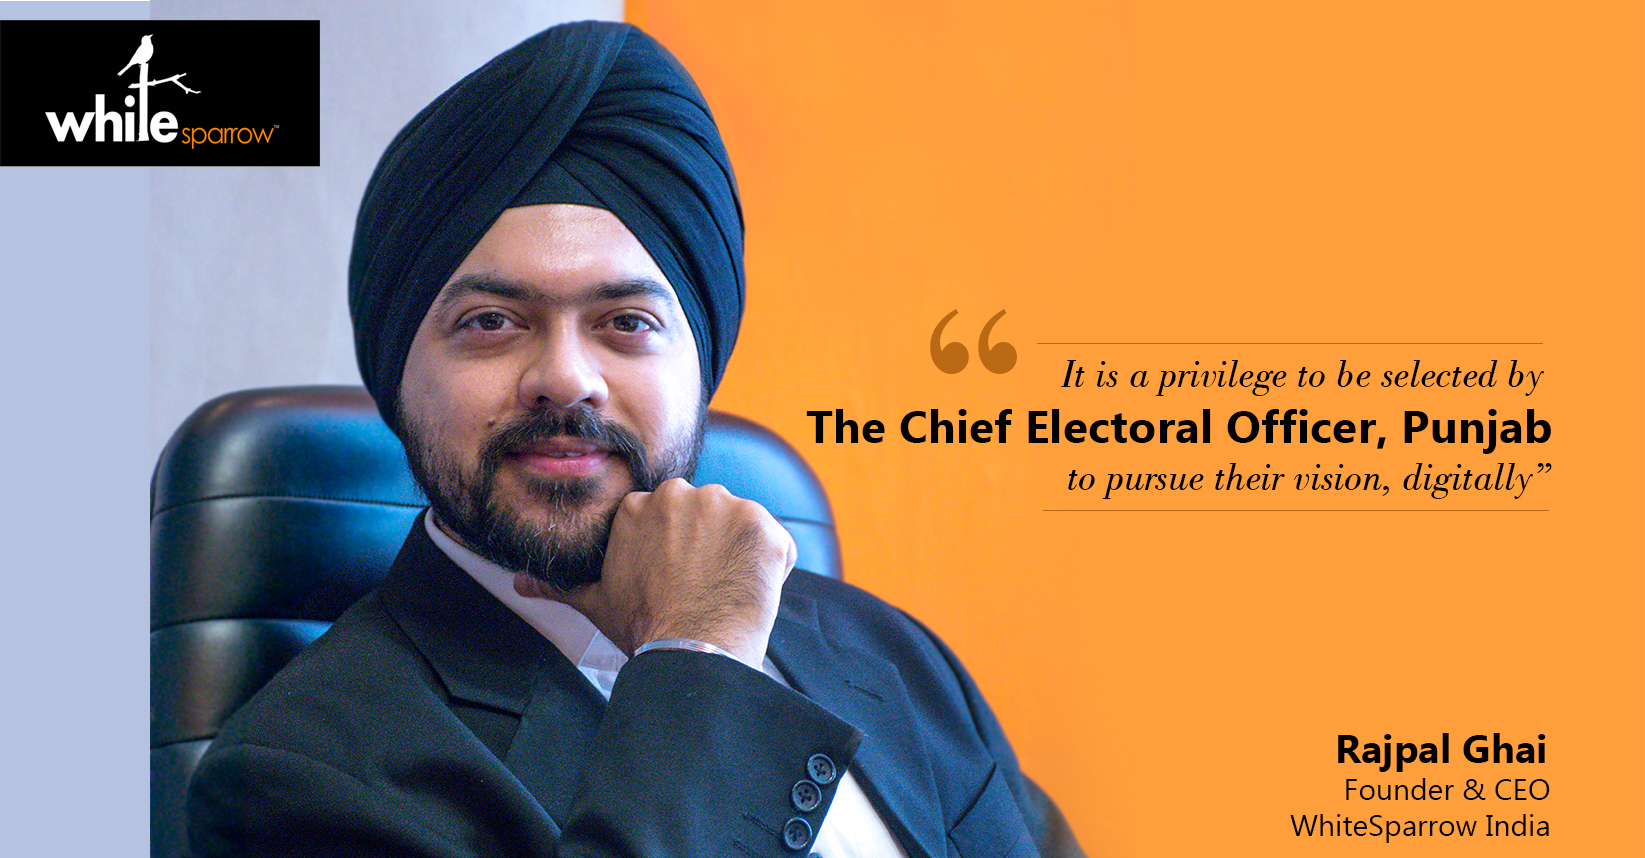 WhiteSparrow India bags the prestigious Social Media Campaign  of The Chief Electoral Officer,  Punjab